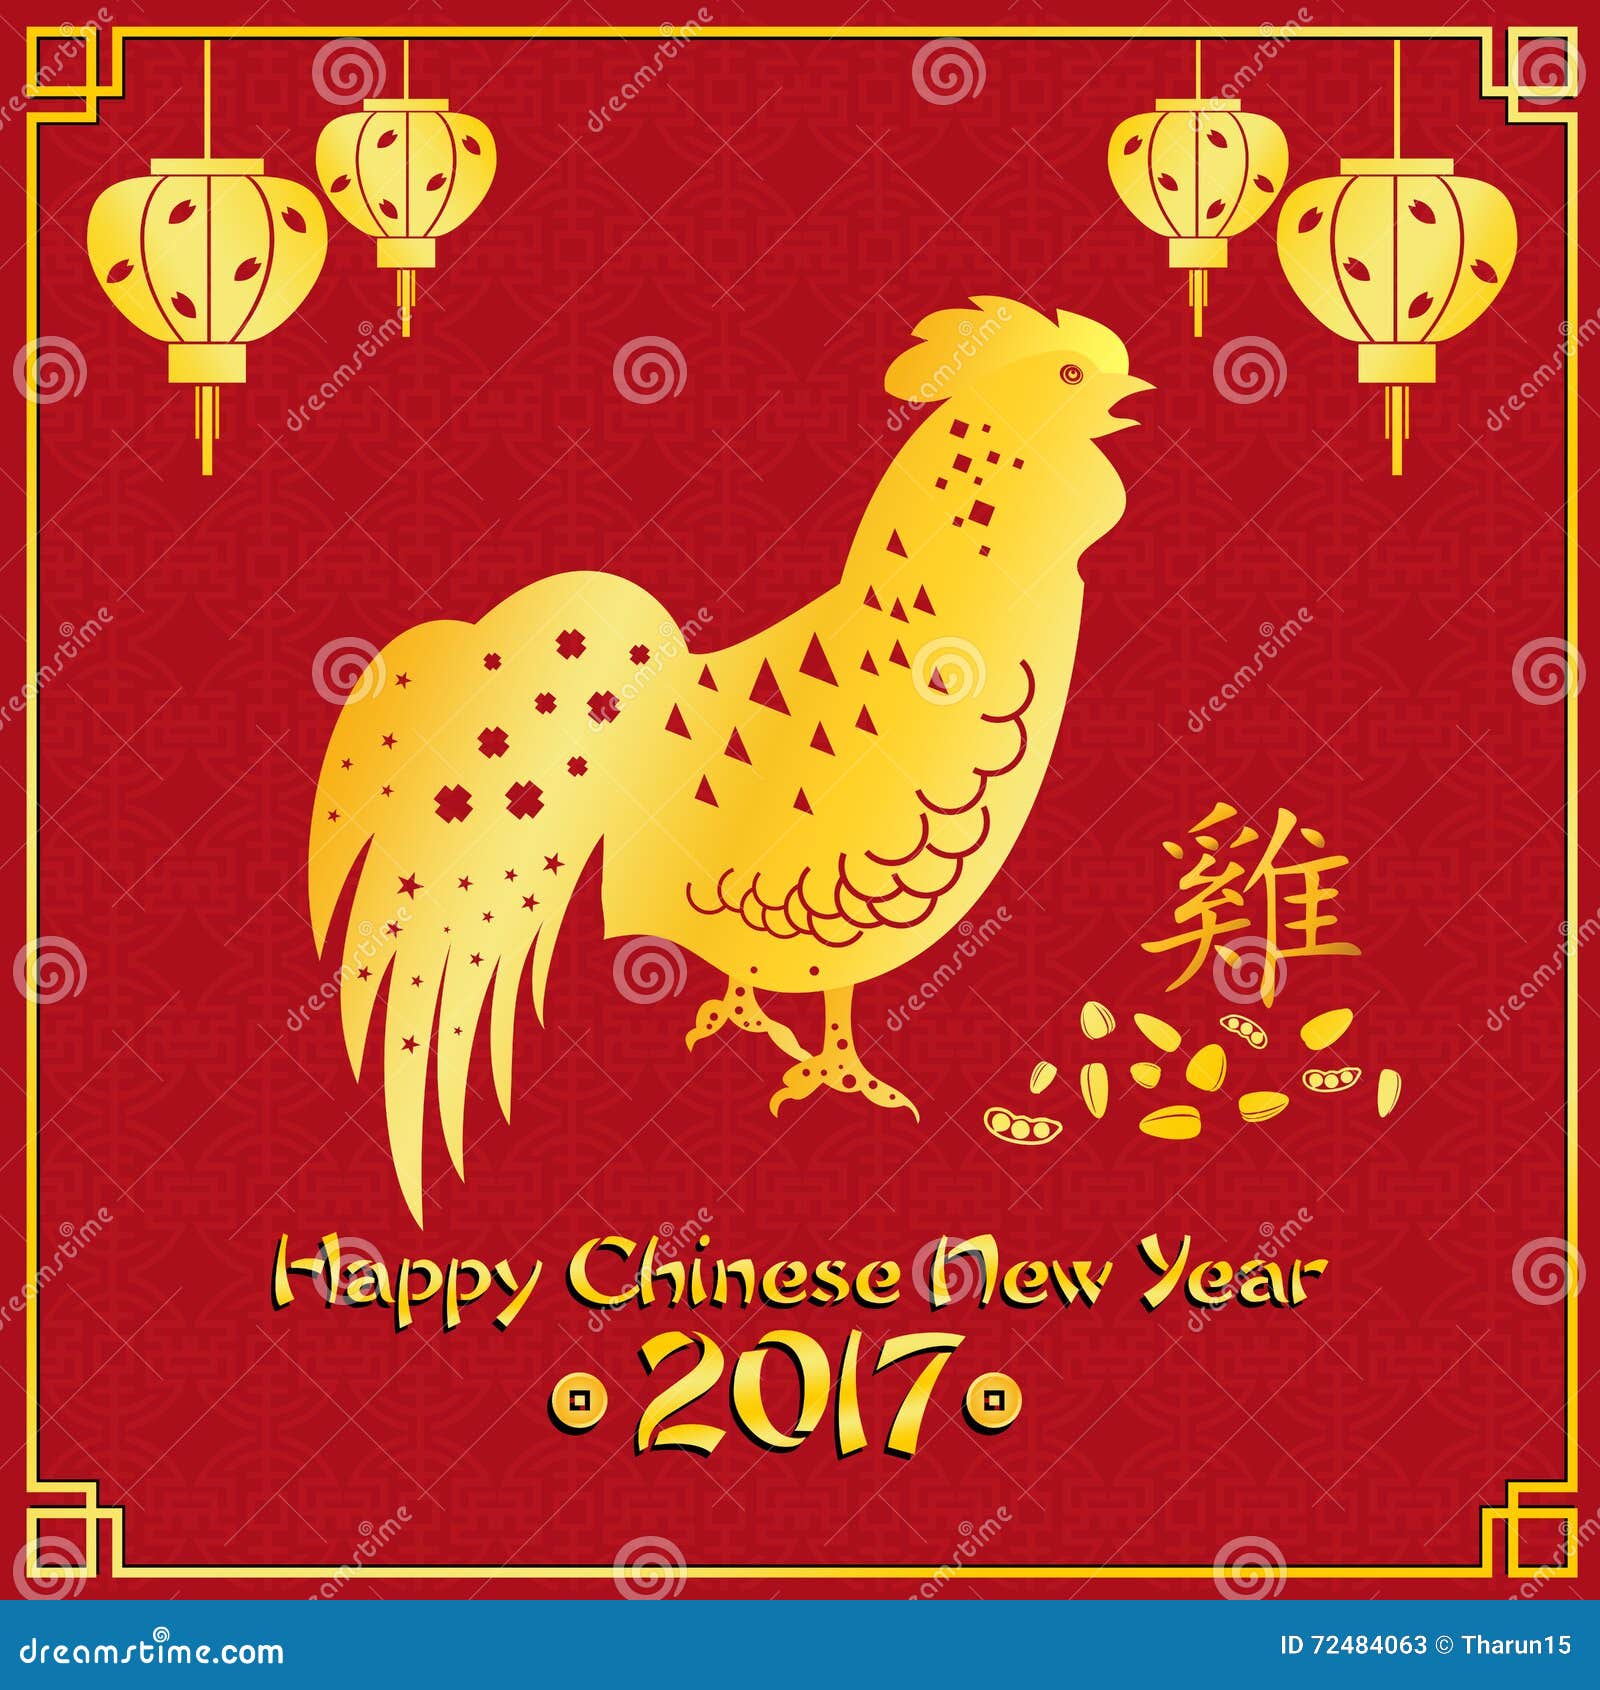 chinese-new-year-greeting-card-stock-illustration-illustration-of